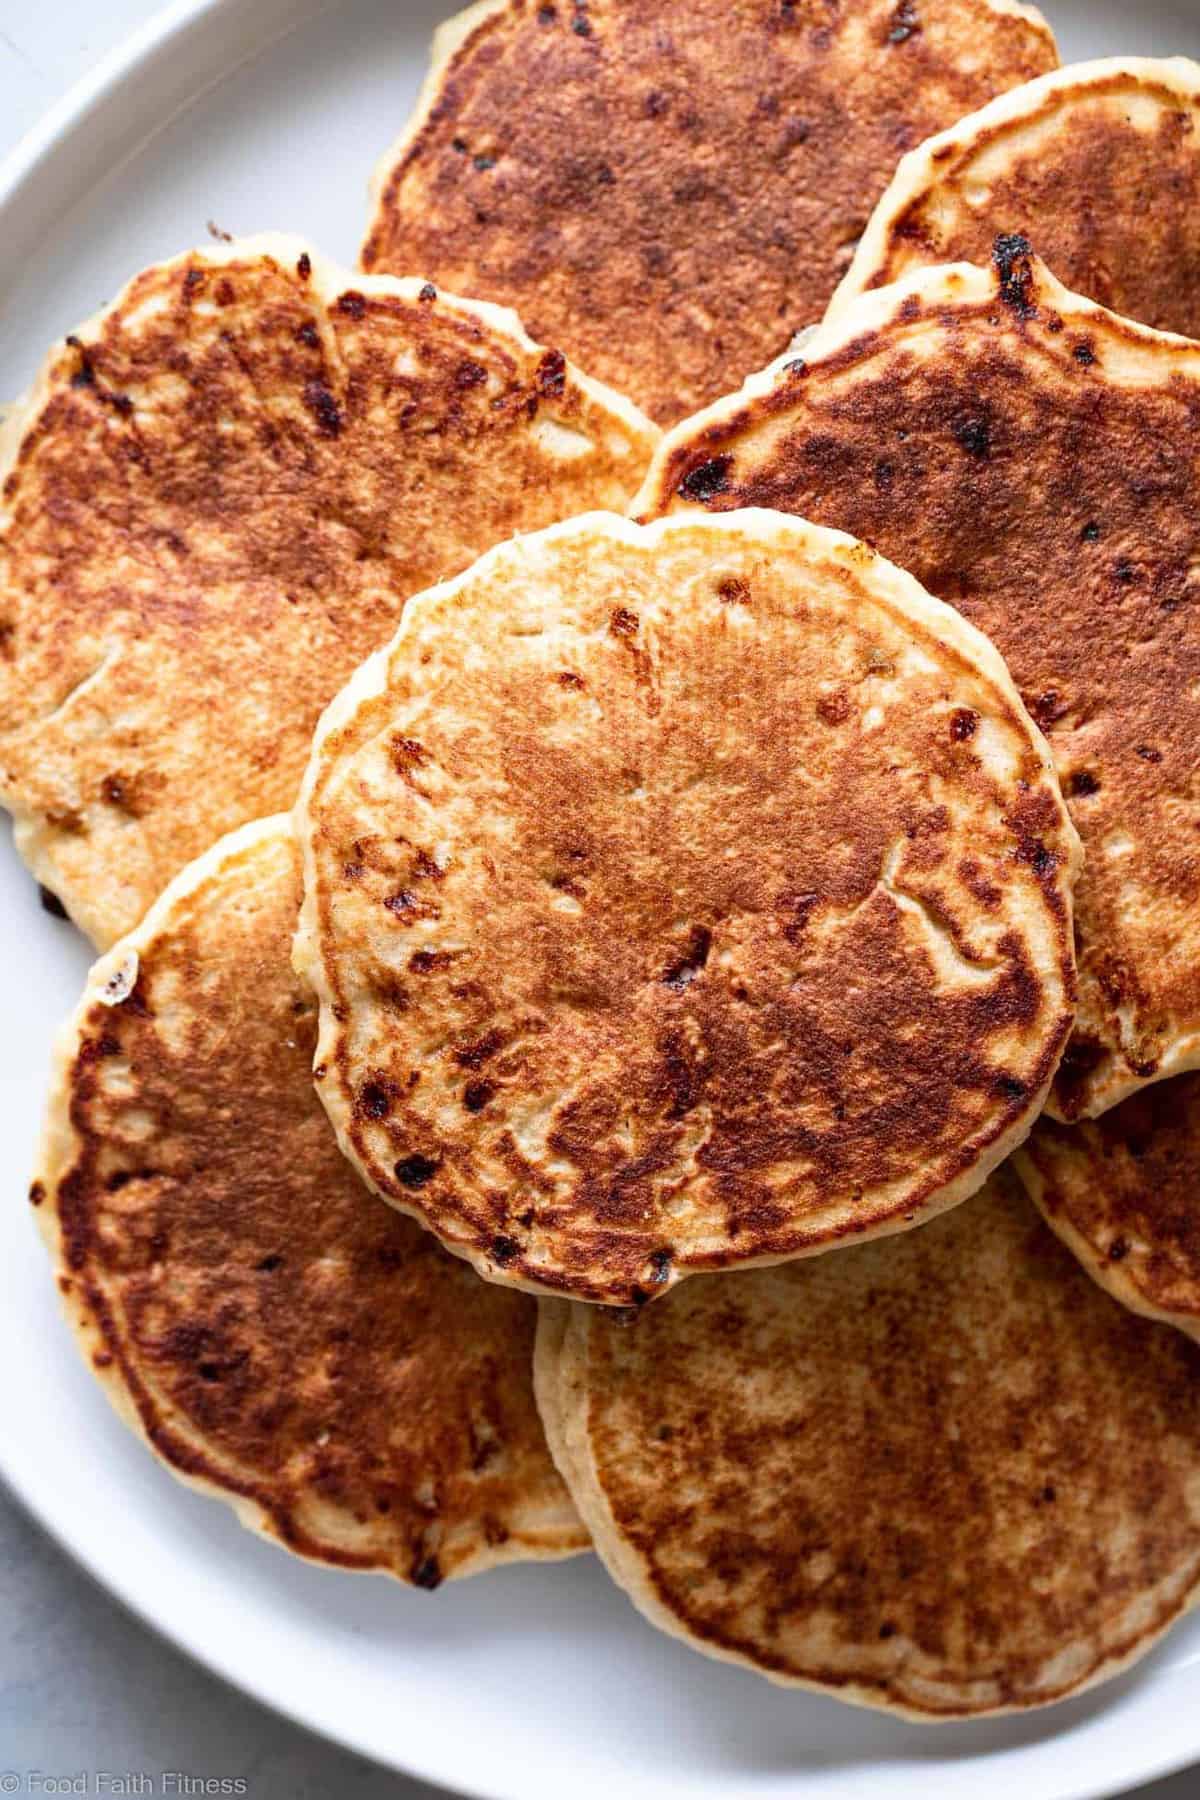 Cottage Cheese Pancakes Recipe - These easy pancakes naturally gluten free and protein packed! Make them ahead for healthy breakfasts or make them on weekends! Great for kids and adults. | #Foodfaithfitness | 